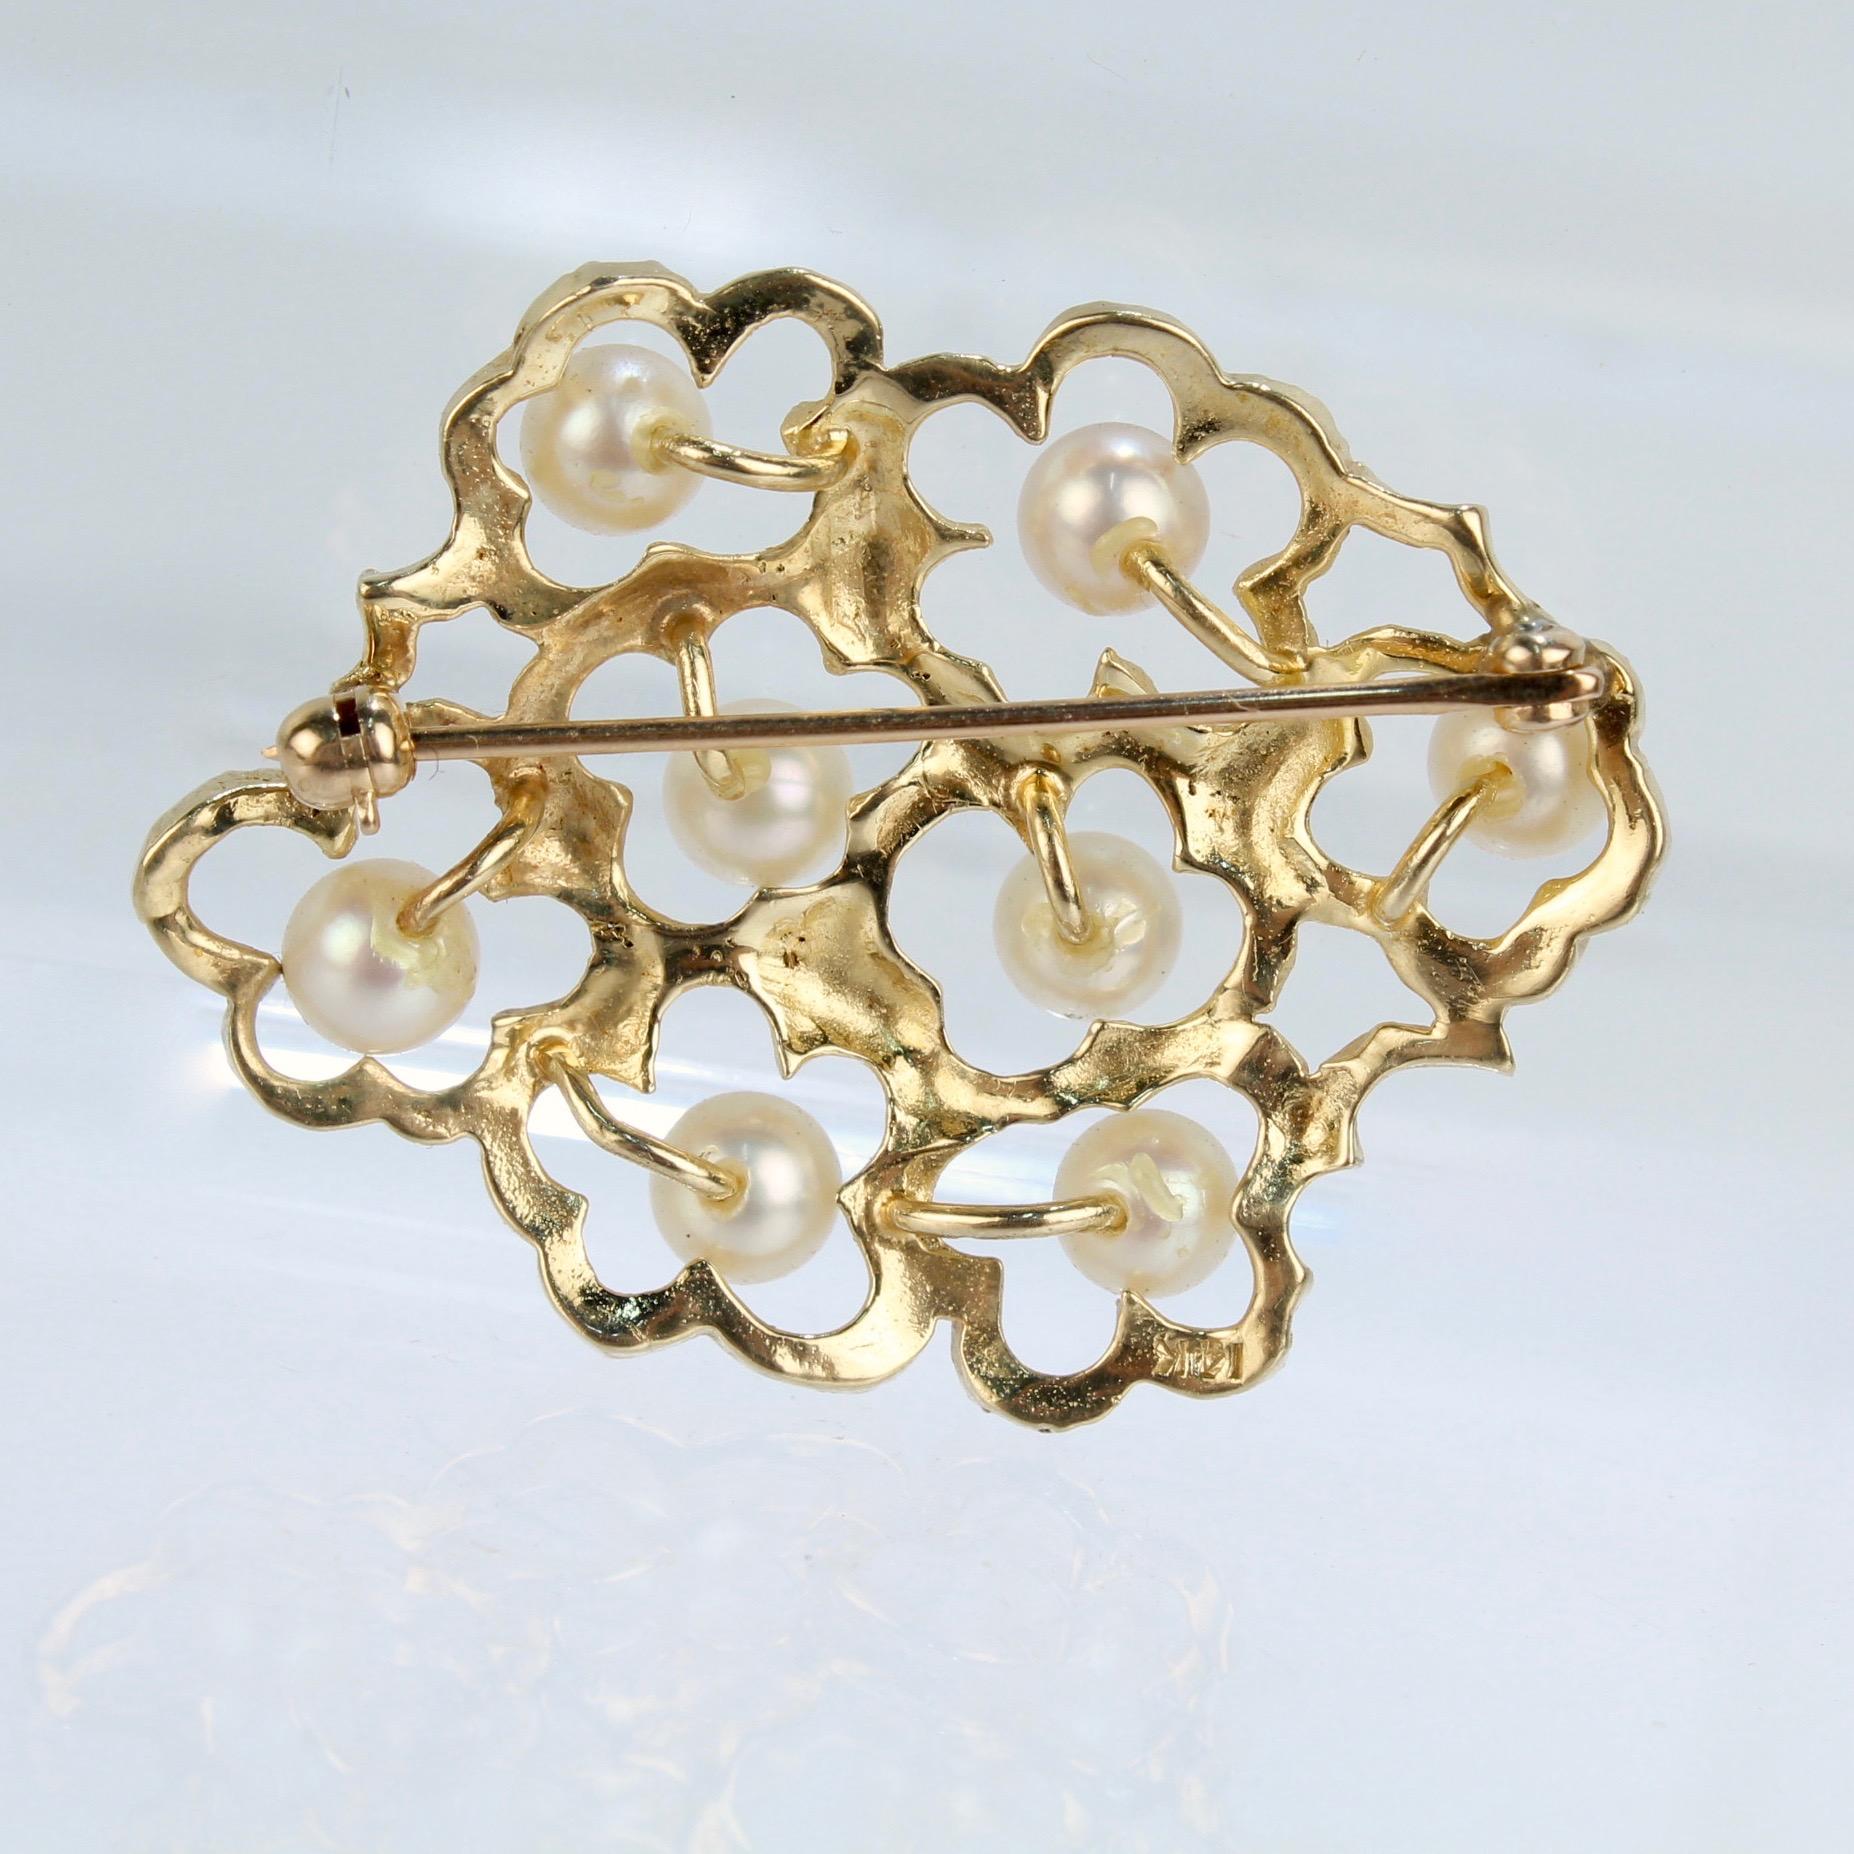 Women's or Men's Modernist 14 Karat Gold and White Round Pearl Floral Brooch or Pin For Sale